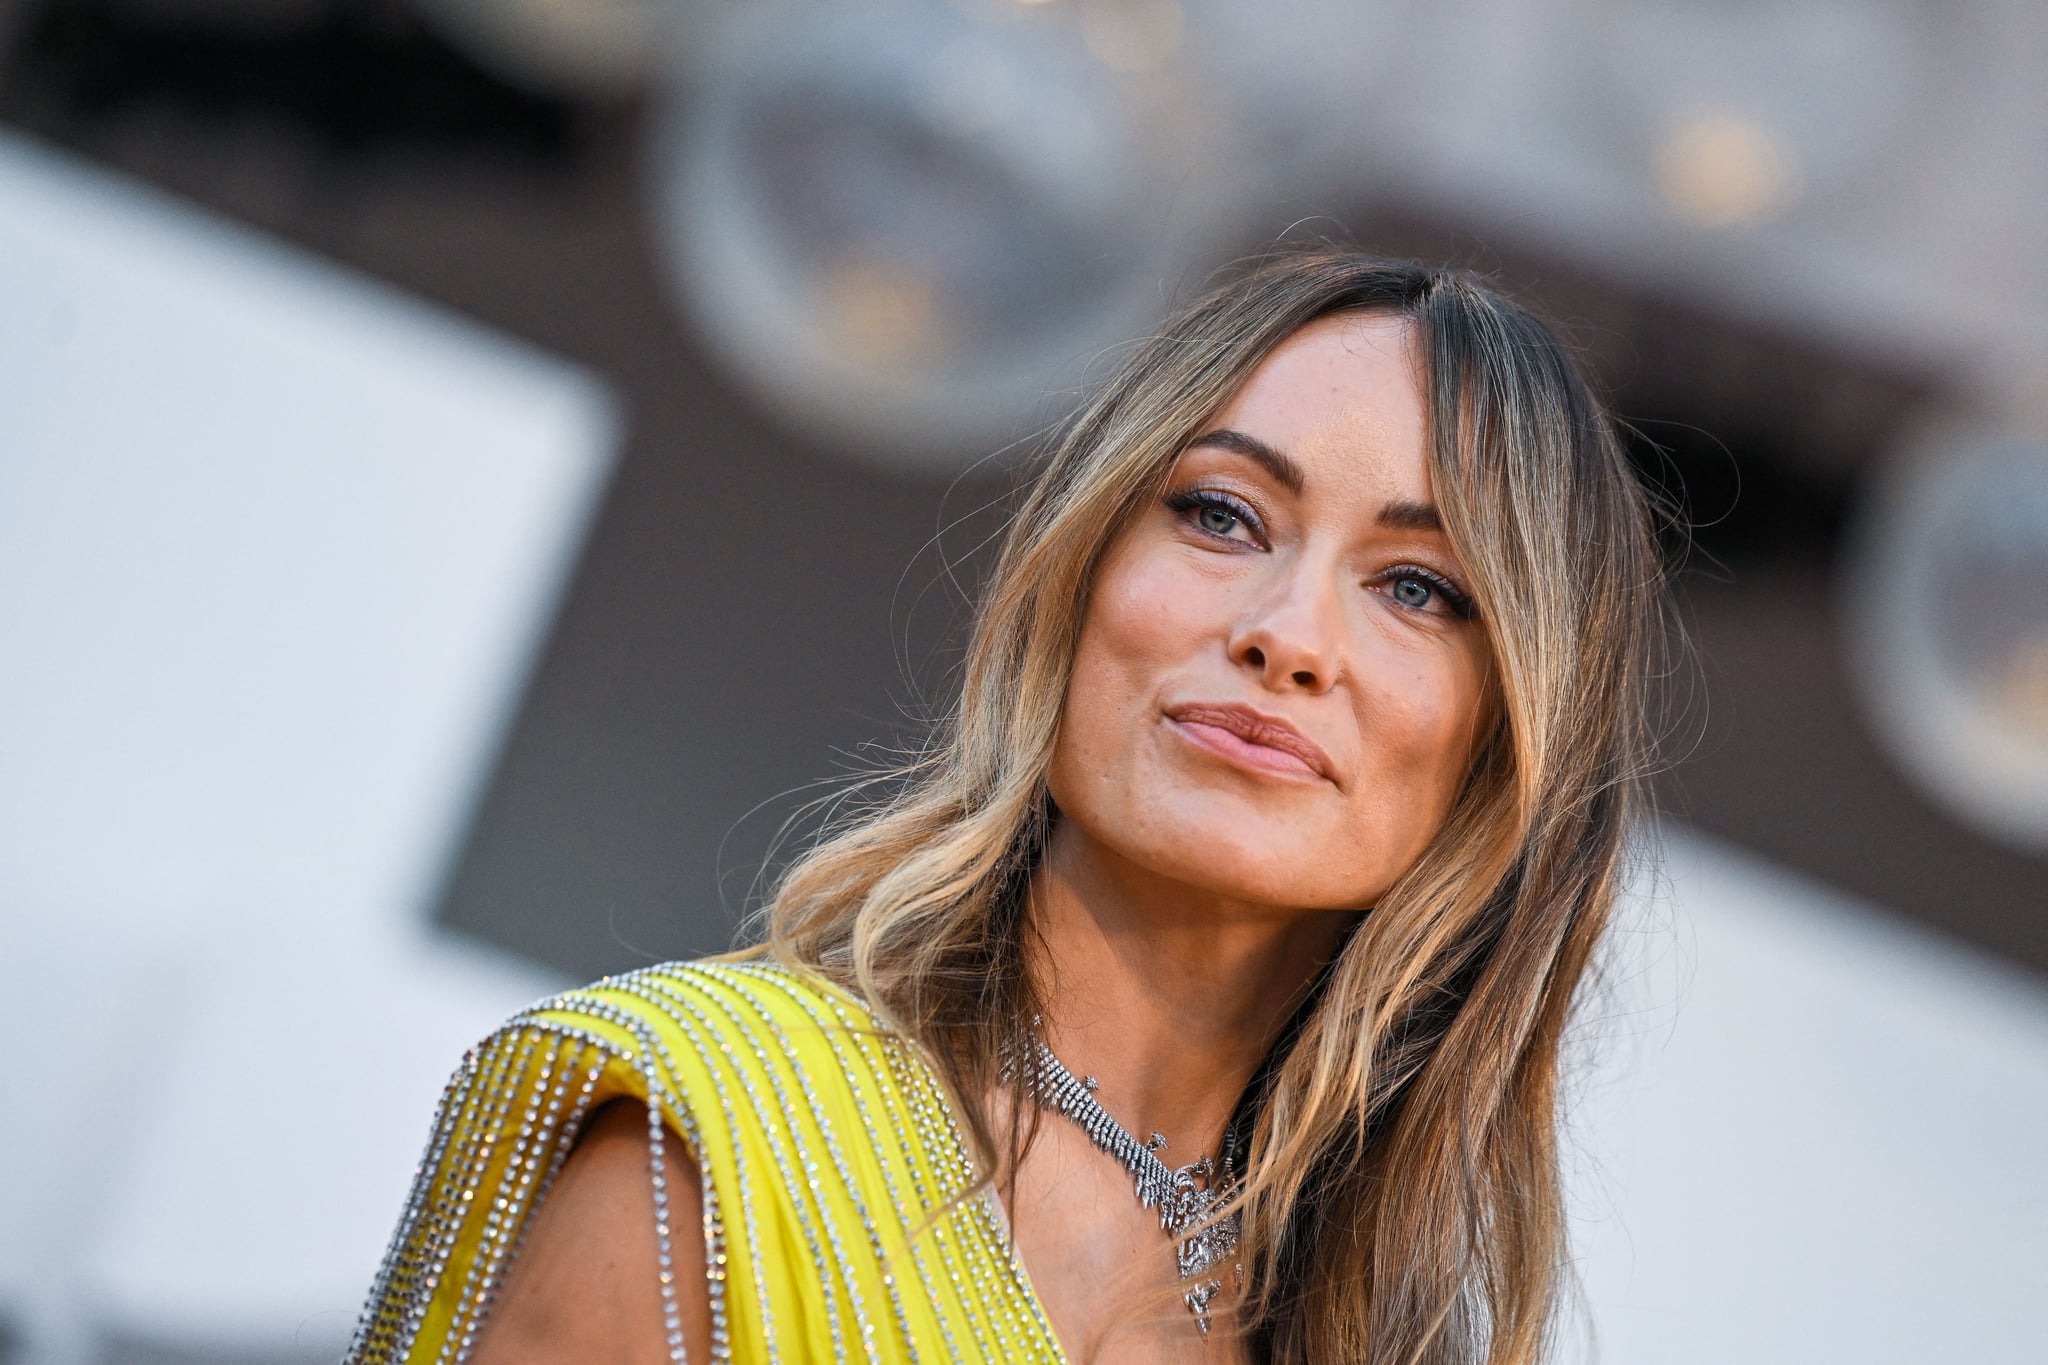 Olivia Wilde at the Venice Film Festival screening of Don't Worry Darling.